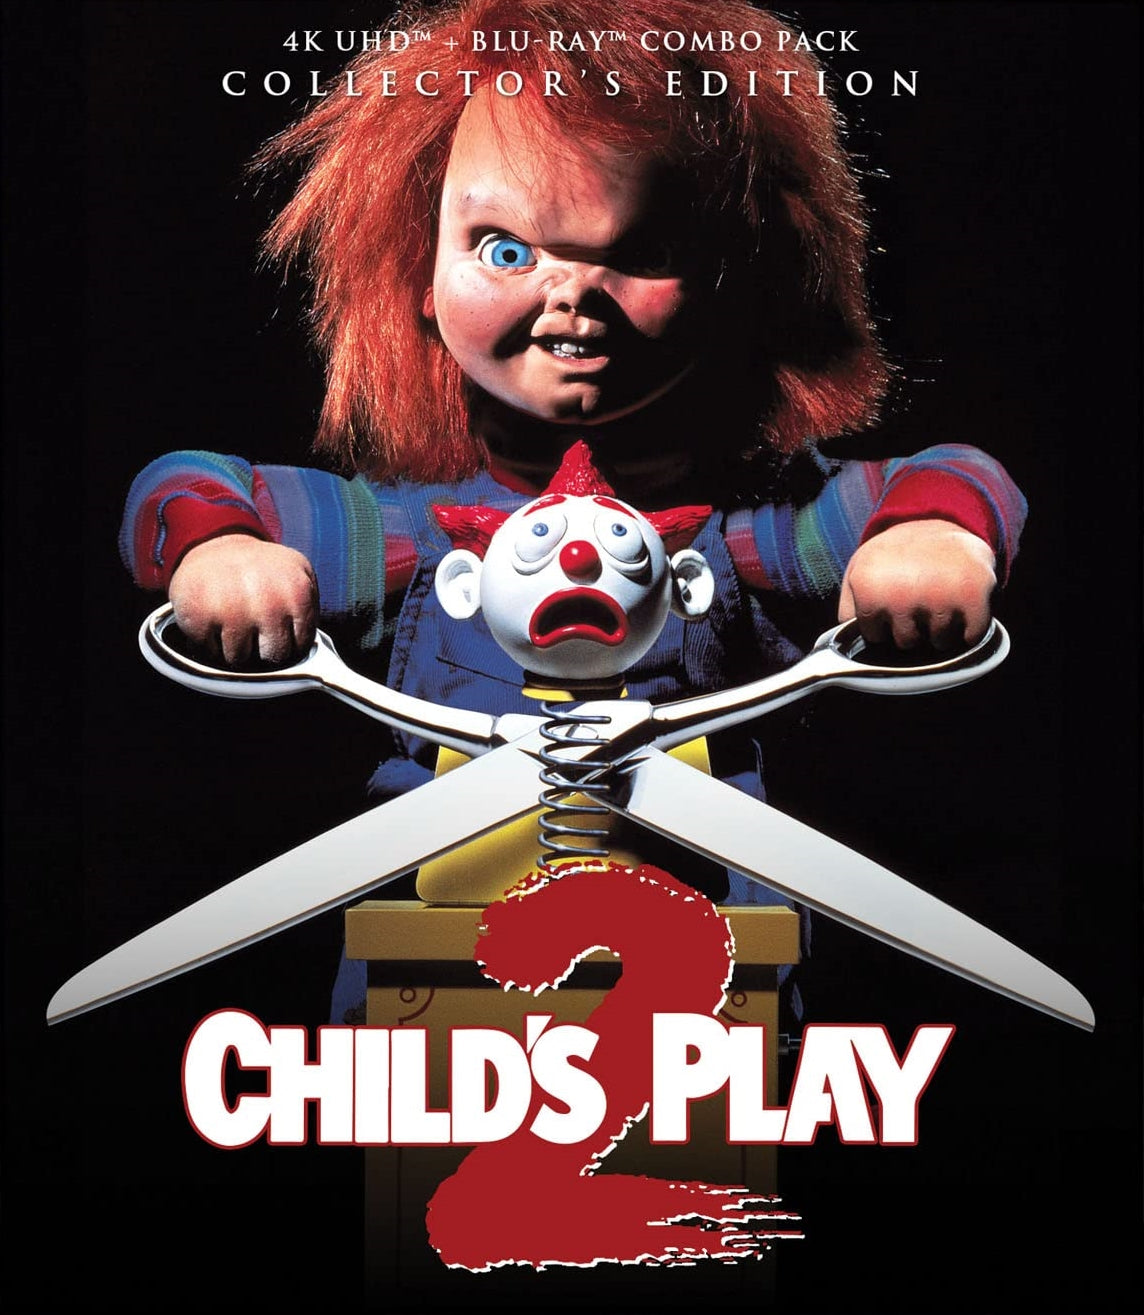 CHILD'S PLAY 2 (COLLECTOR'S EDITION) 4K UHD/BLU-RAY